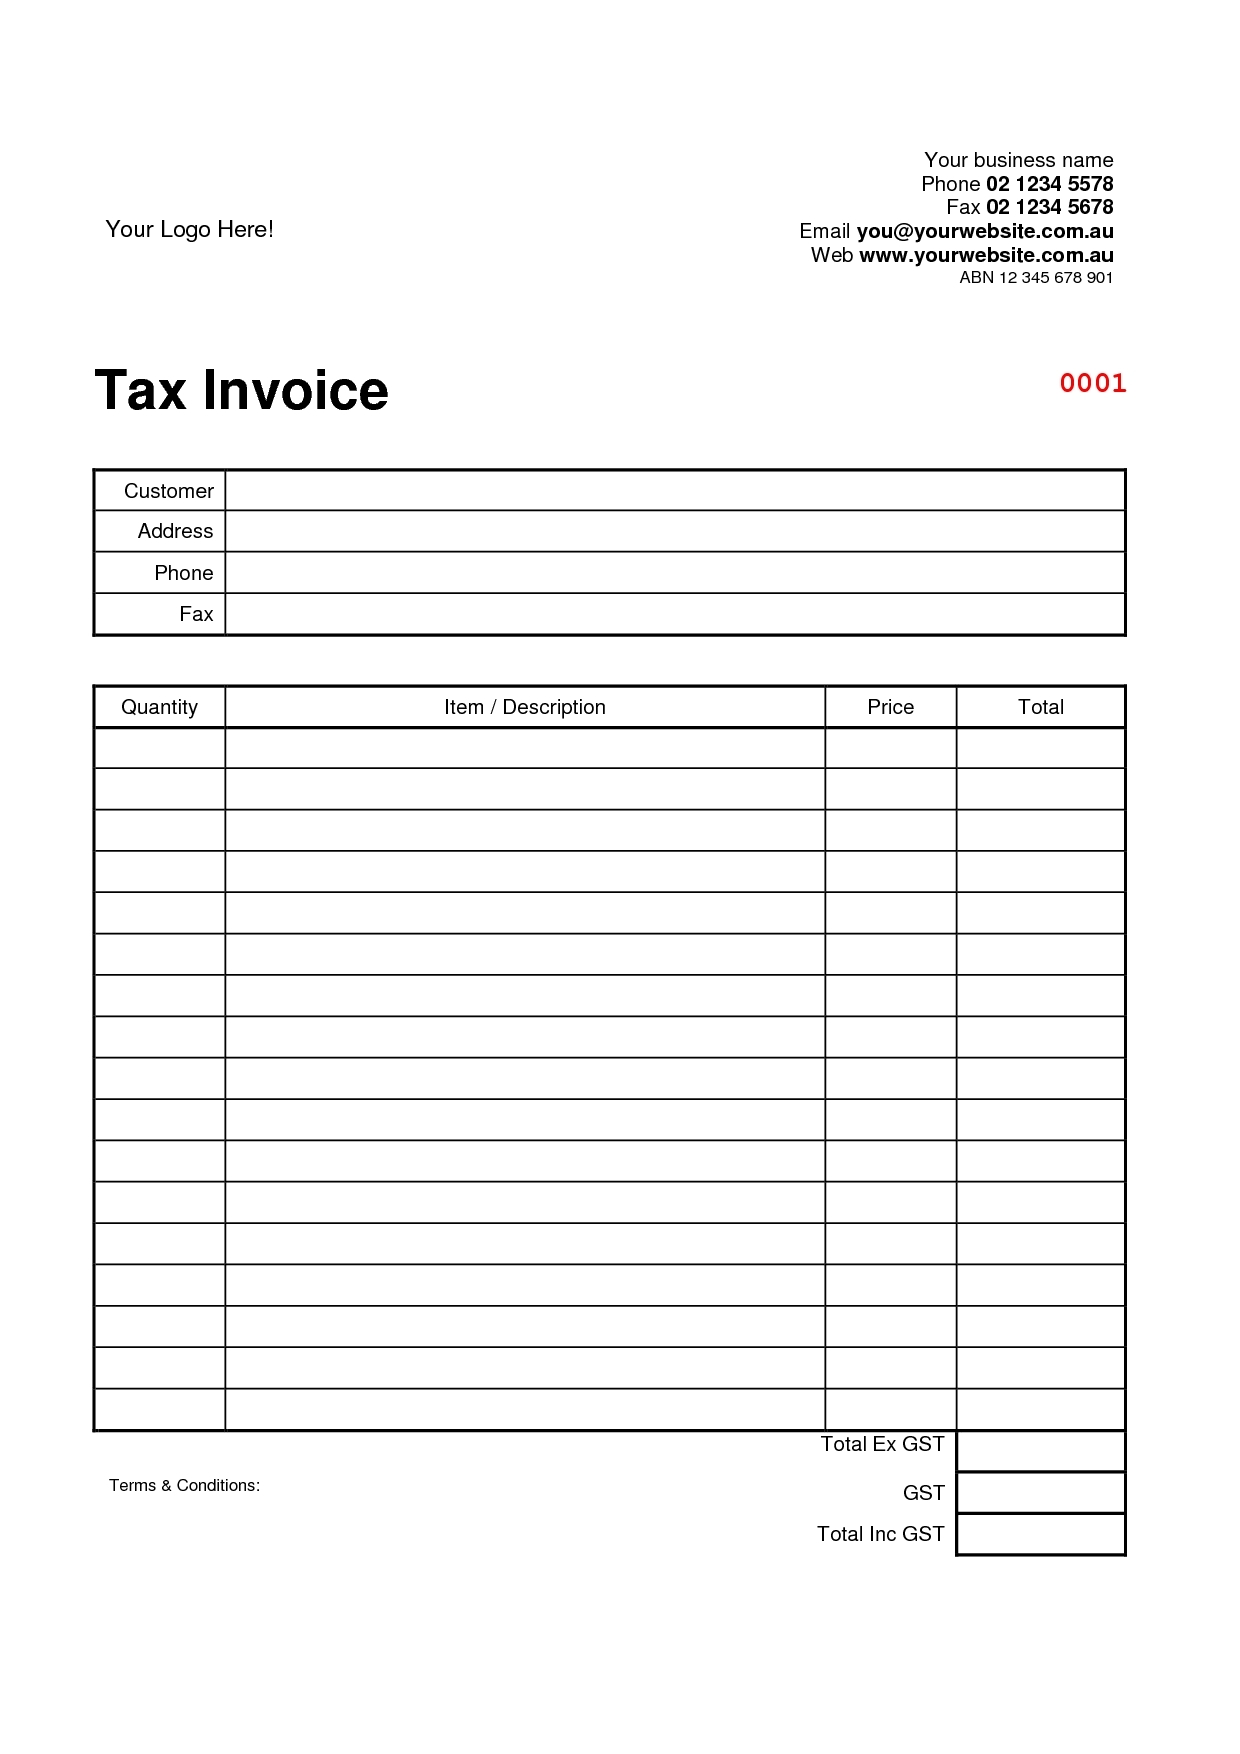 sample tax invoice template invoice template free 2016 tax invoice format